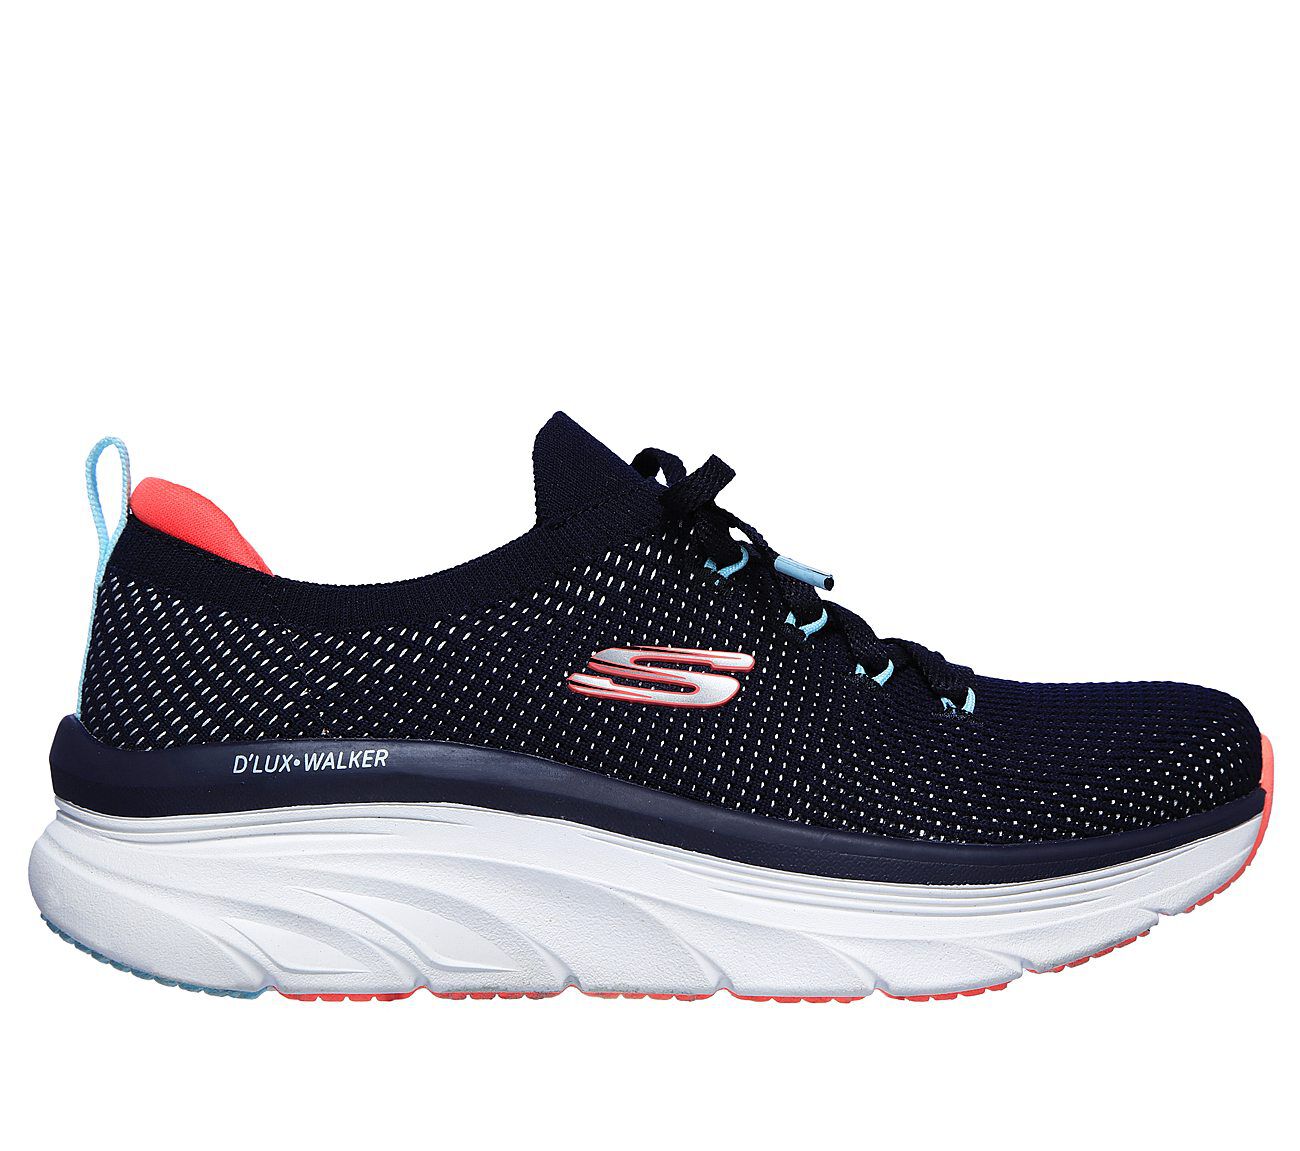 skechers air cooled shoes price